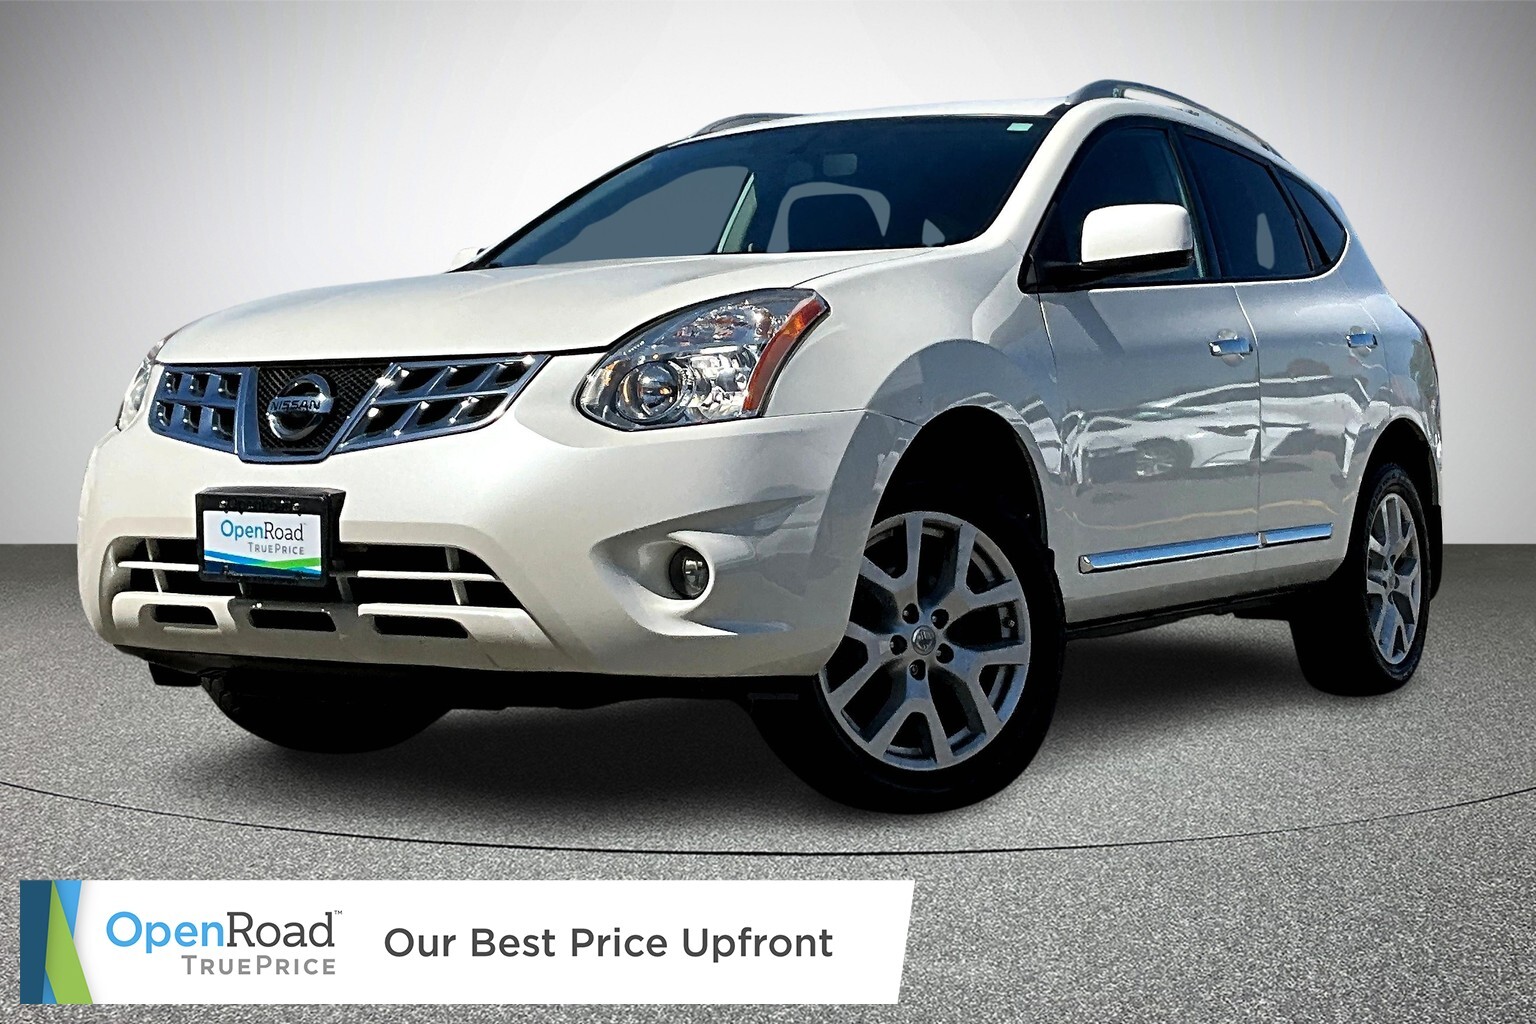 2013 Nissan Rogue FWD 4dr S